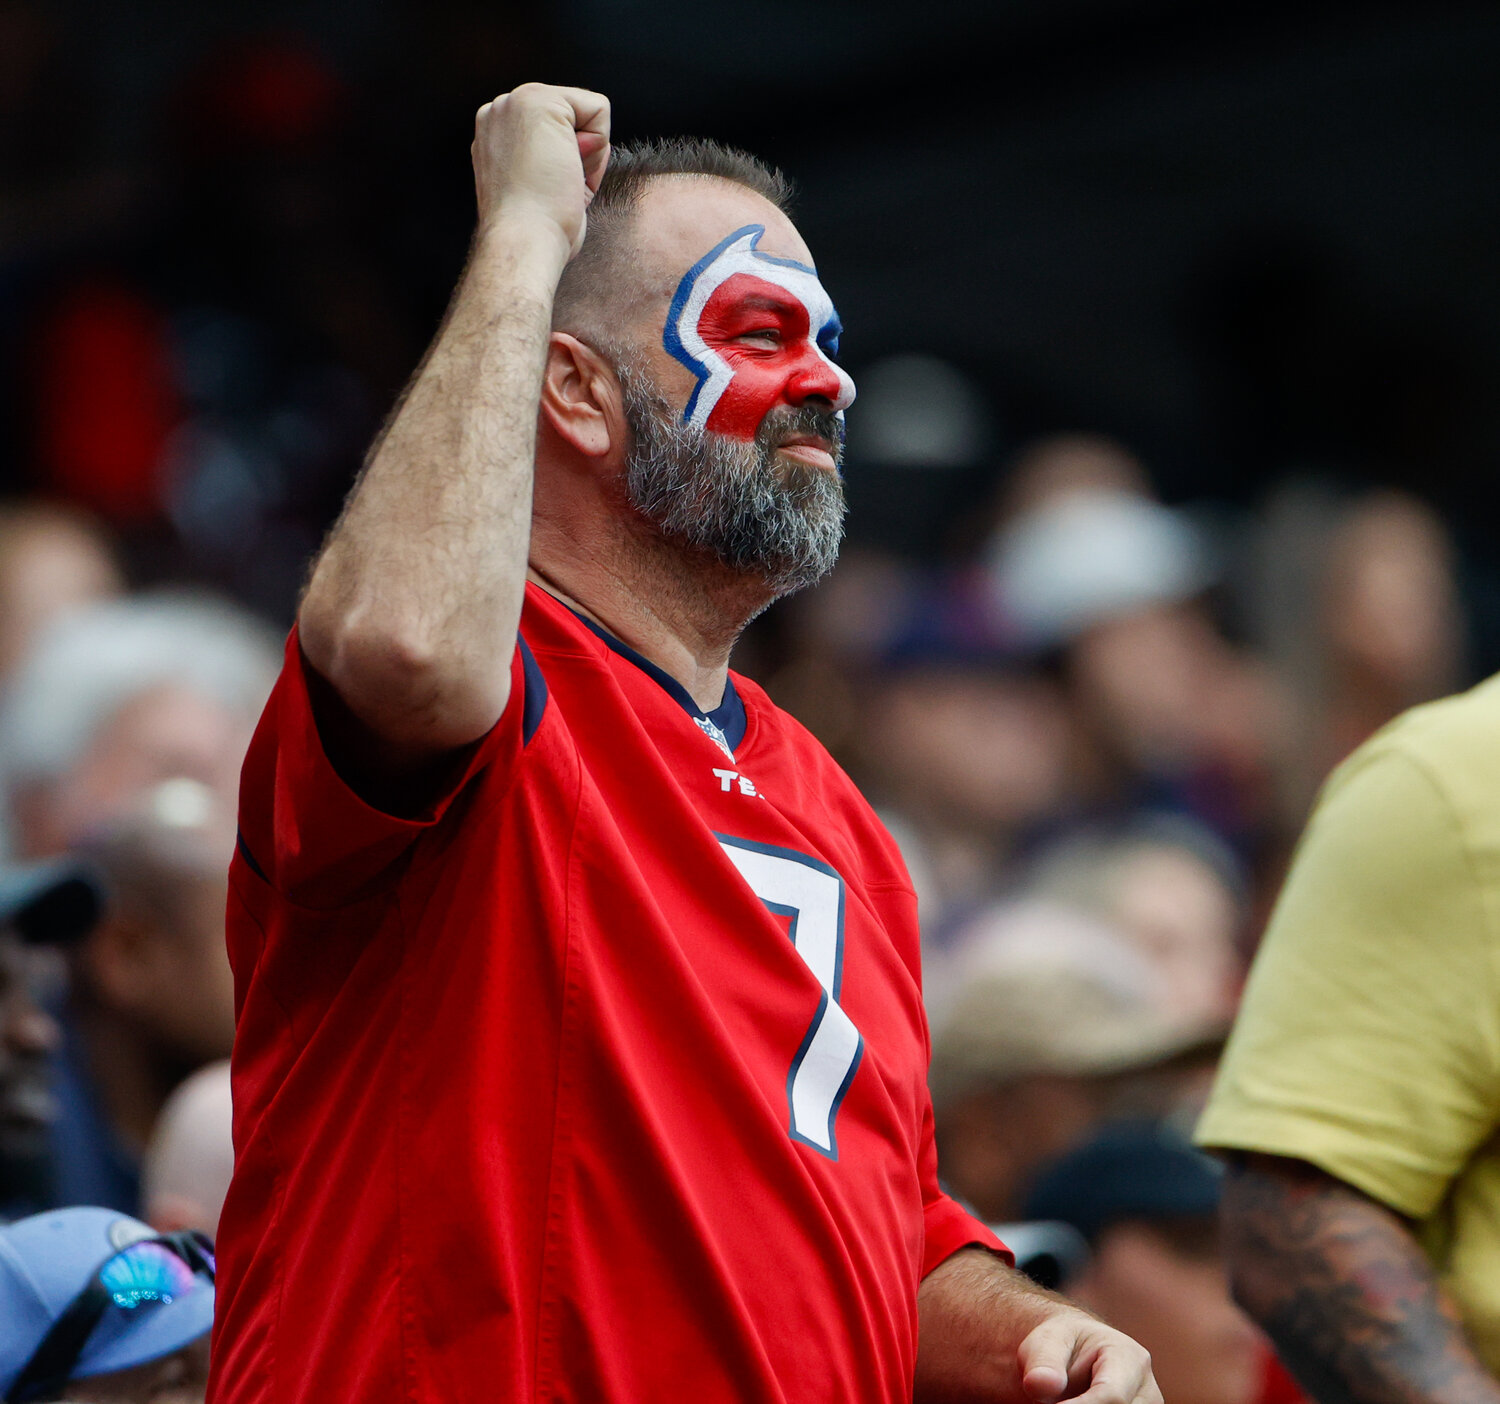 A Houston Texans fan reacts after a touchdown during an NFL game between the Texans and the Tampa Bay Buccaneers on November 5, 2023 in Houston.